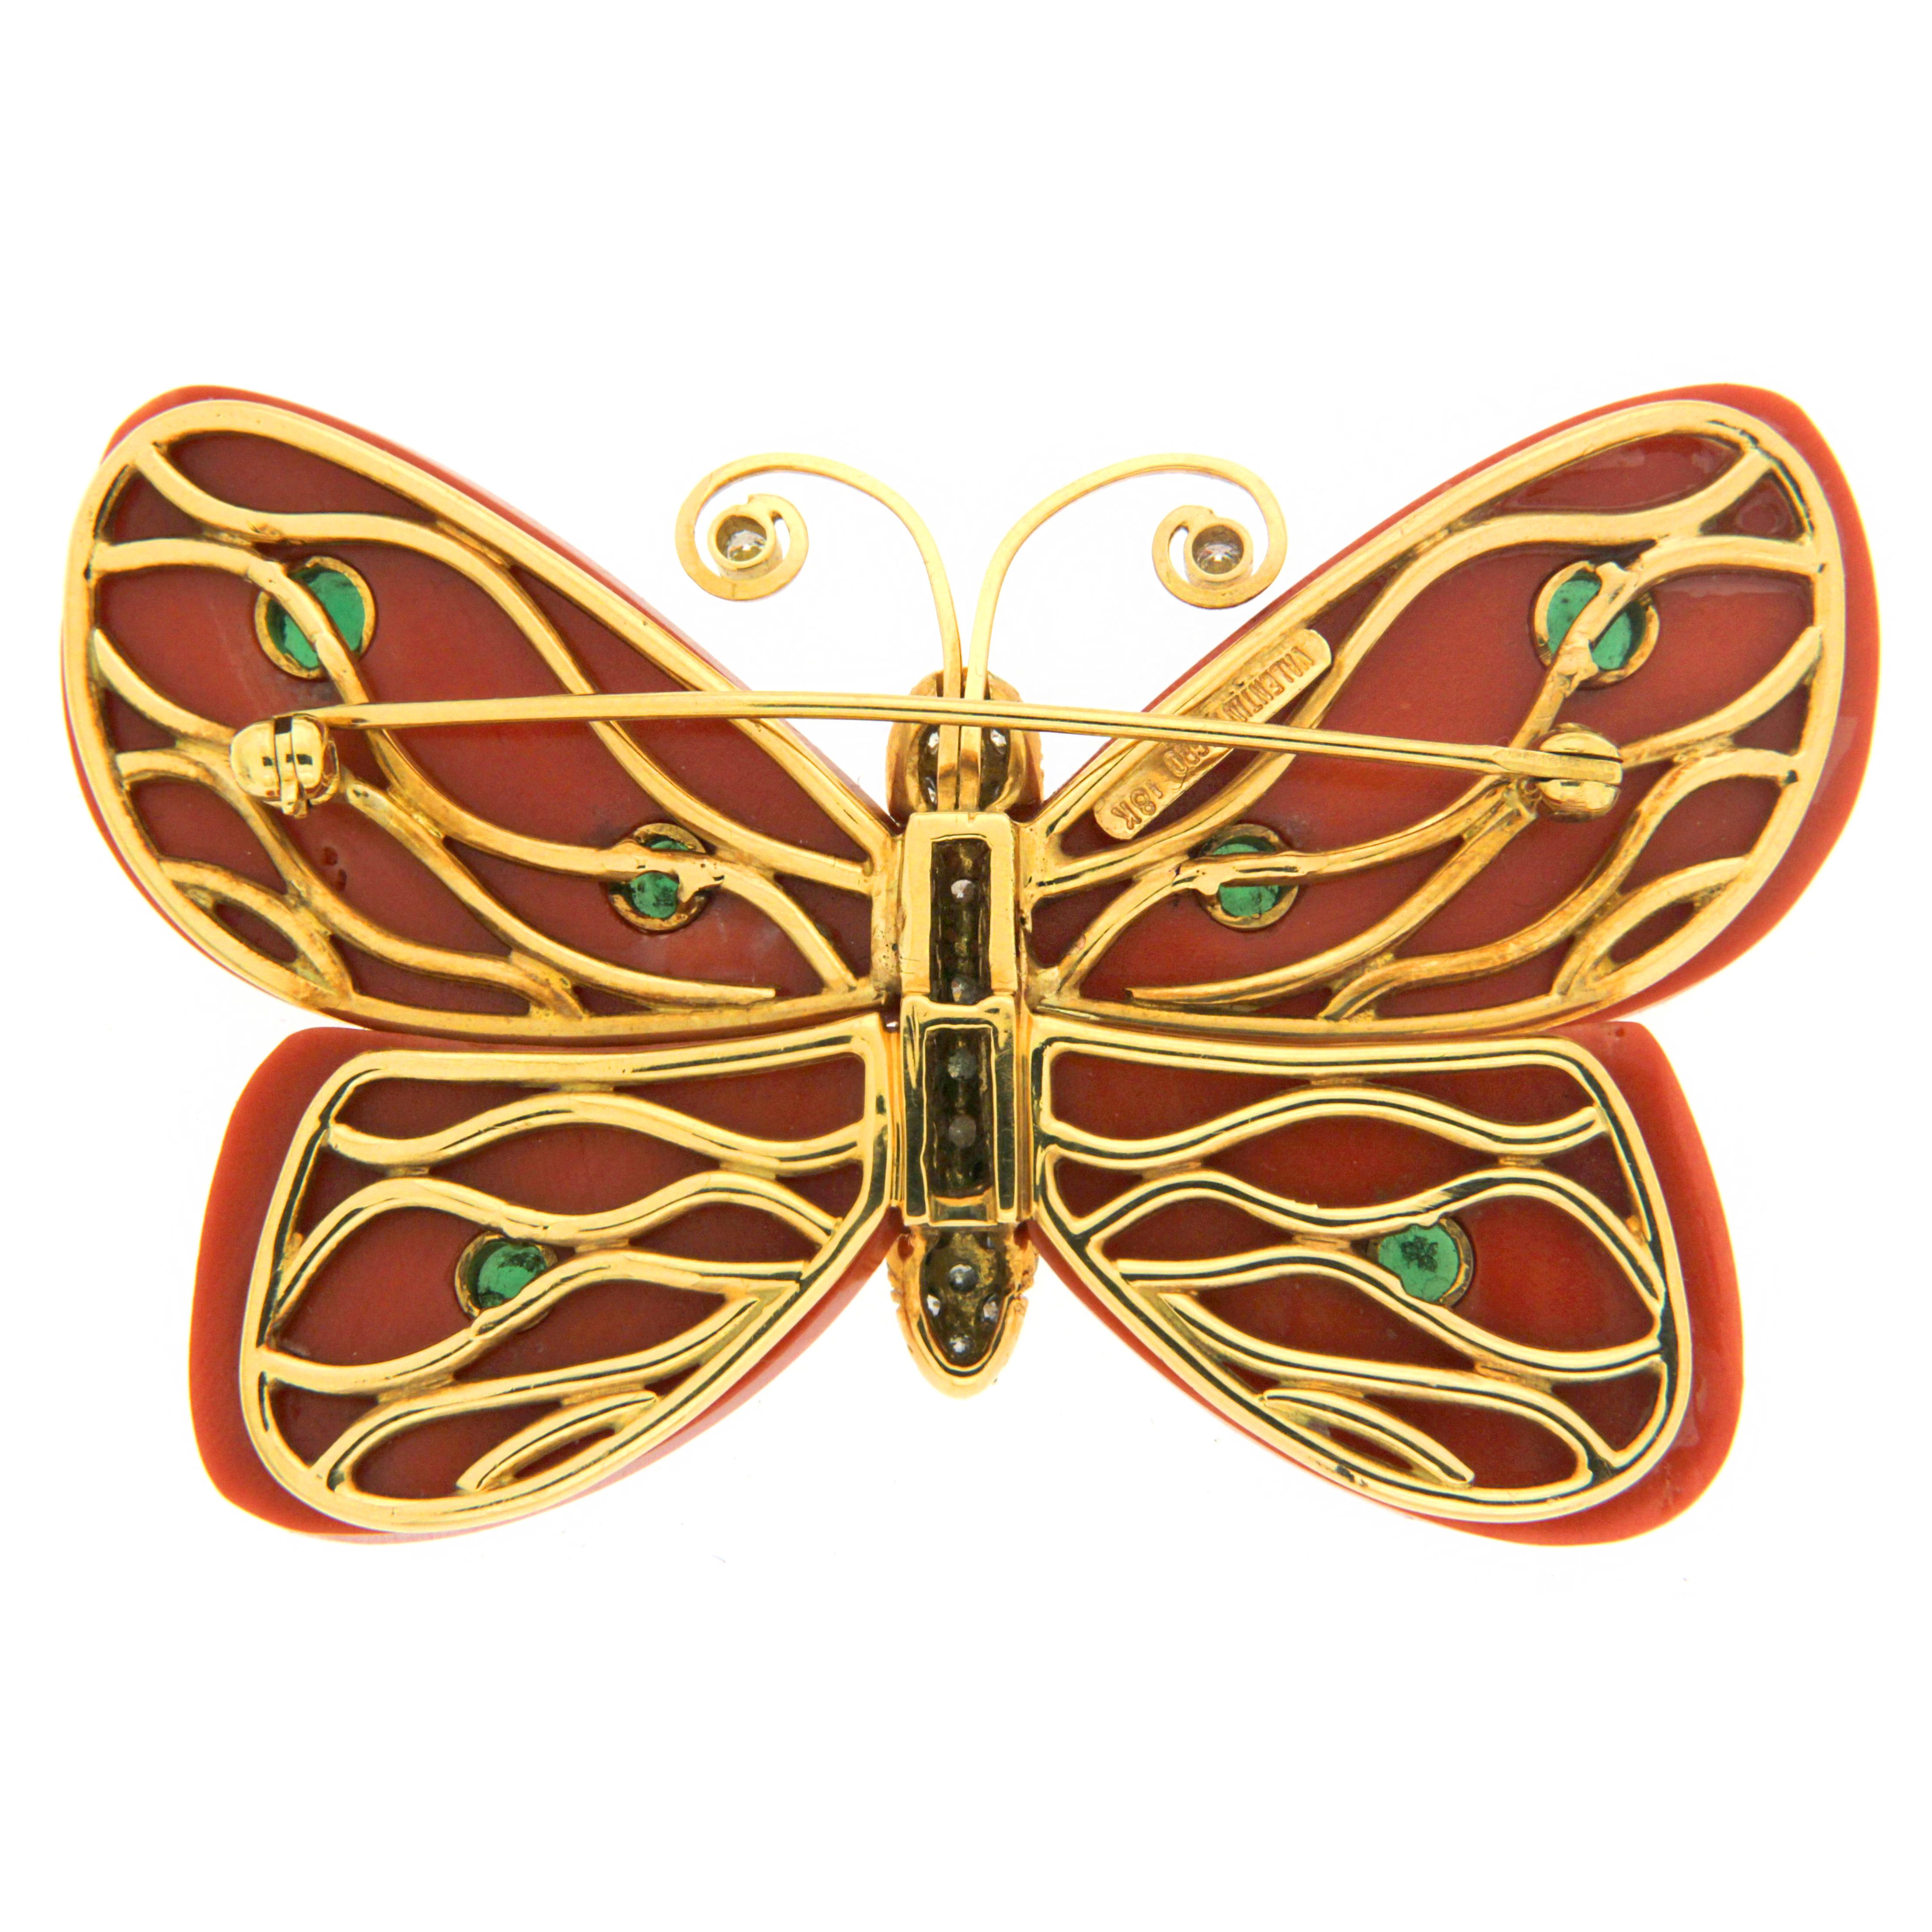 Gems envision a butterfly for this whimsical brooch. 18k yellow gold is the base, as brilliant cut diamonds embellish the body. Golden wire curls for the antennas, accented by a single diamond on the tips. Four special cuts of coral serve as the